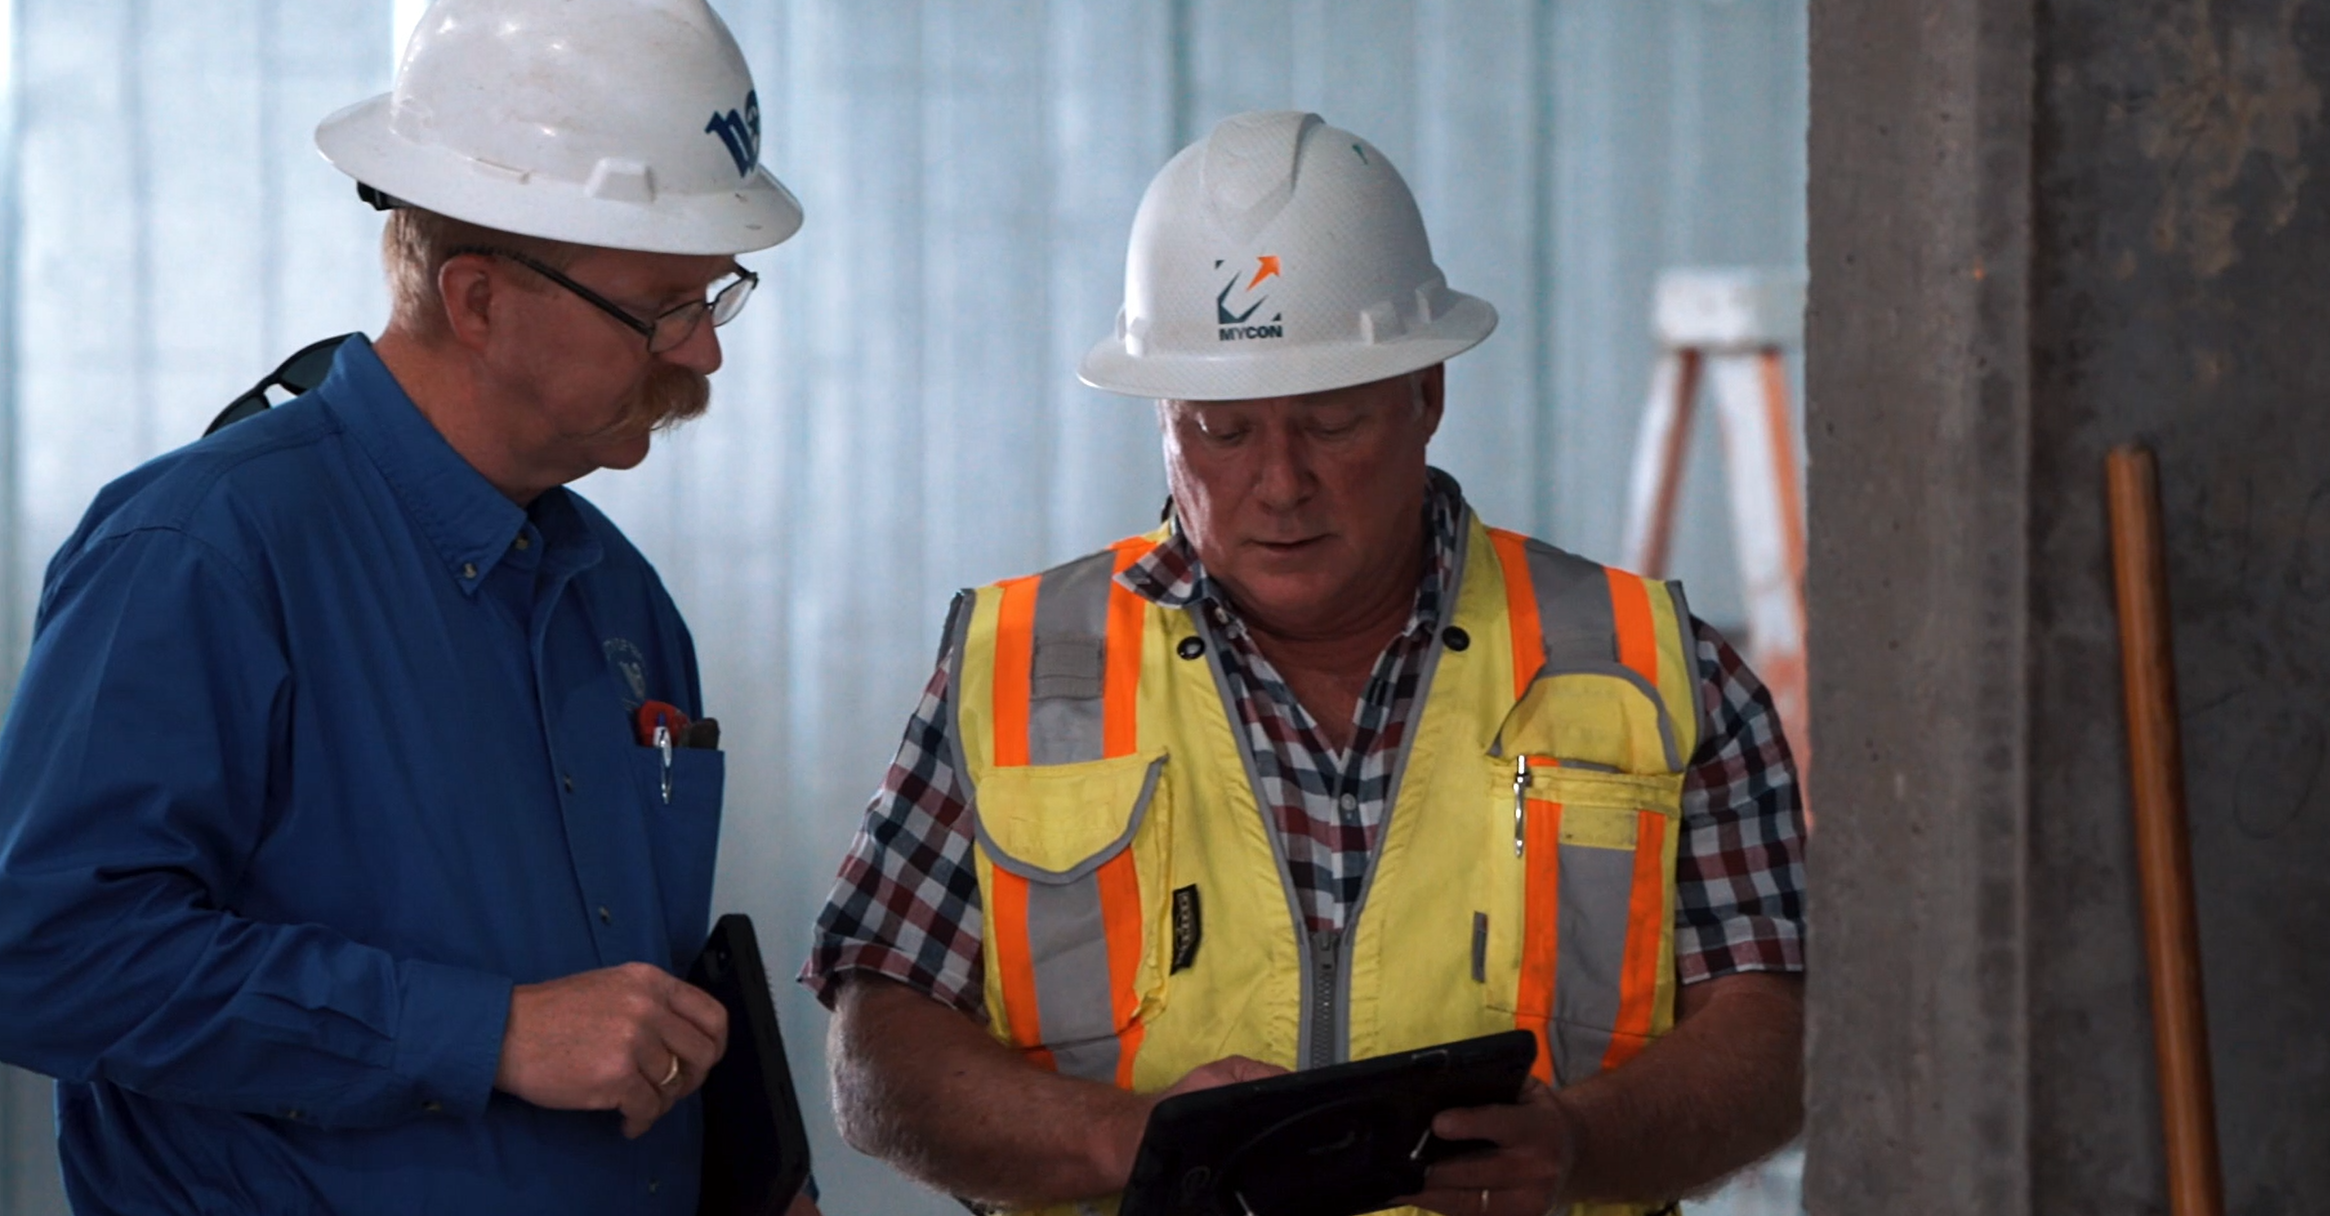 Two construction workers in hard hats looking at a tablet.